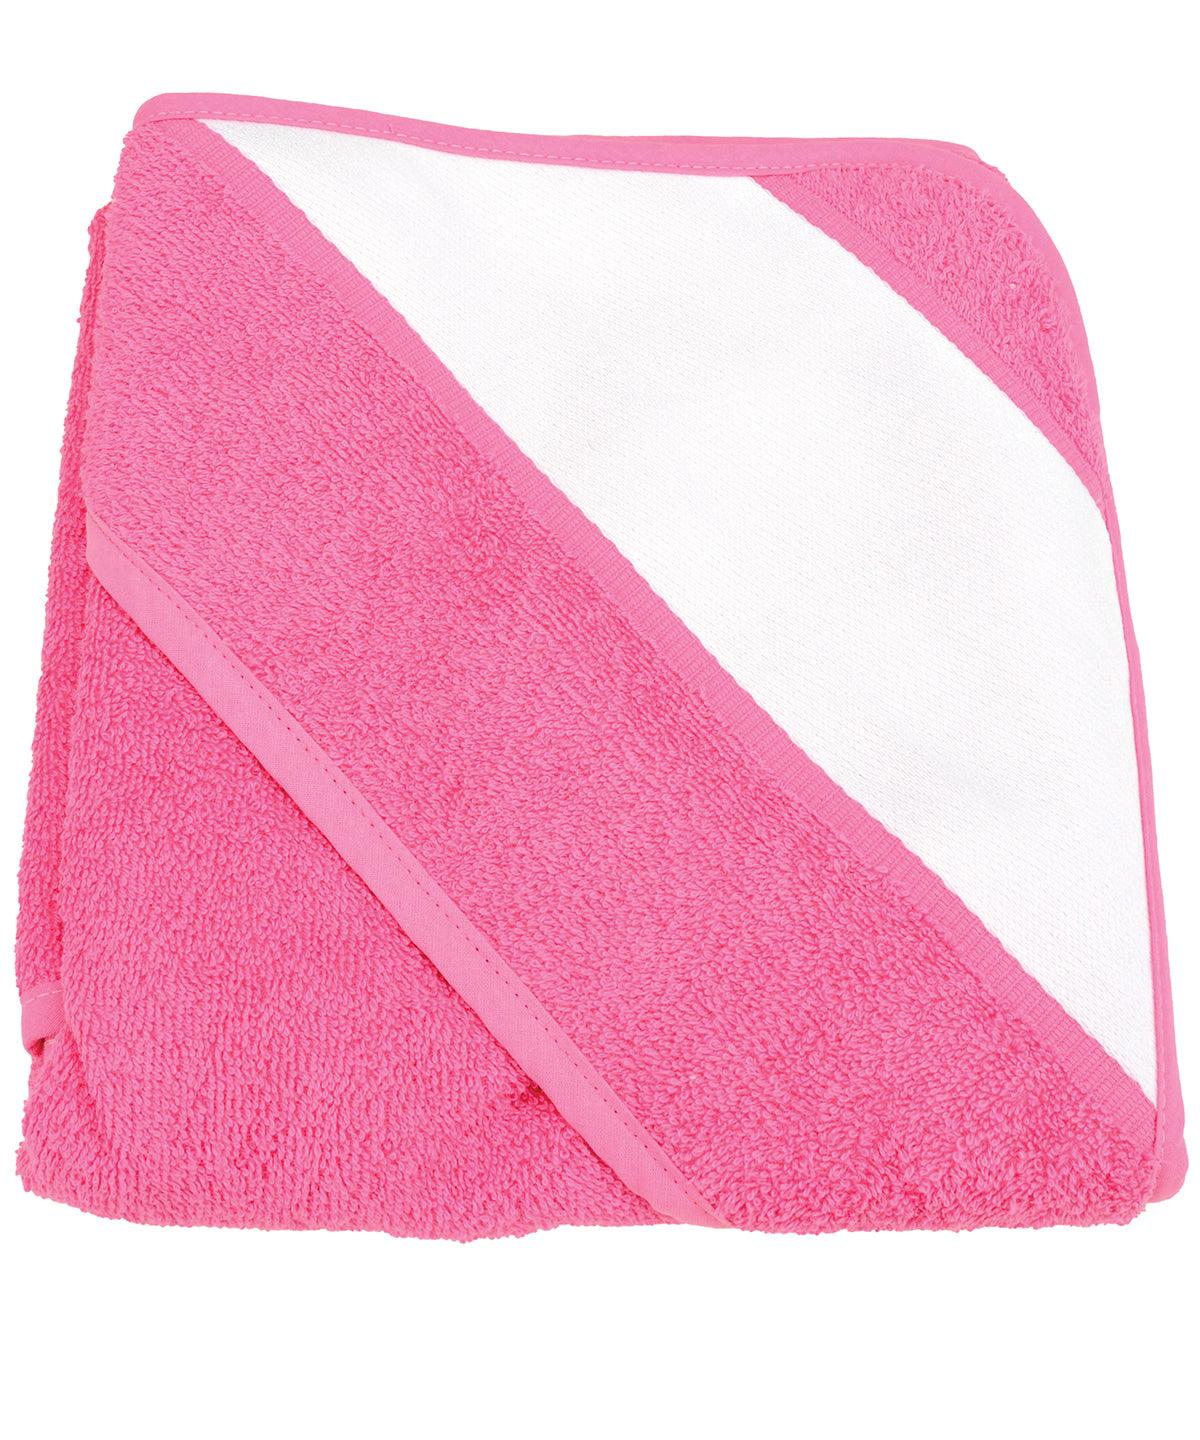 Pink - ARTG® Babiezz® sublimation hooded towel Towels A&R Towels Gifting & Accessories, Homewares & Towelling, Sublimation Schoolwear Centres